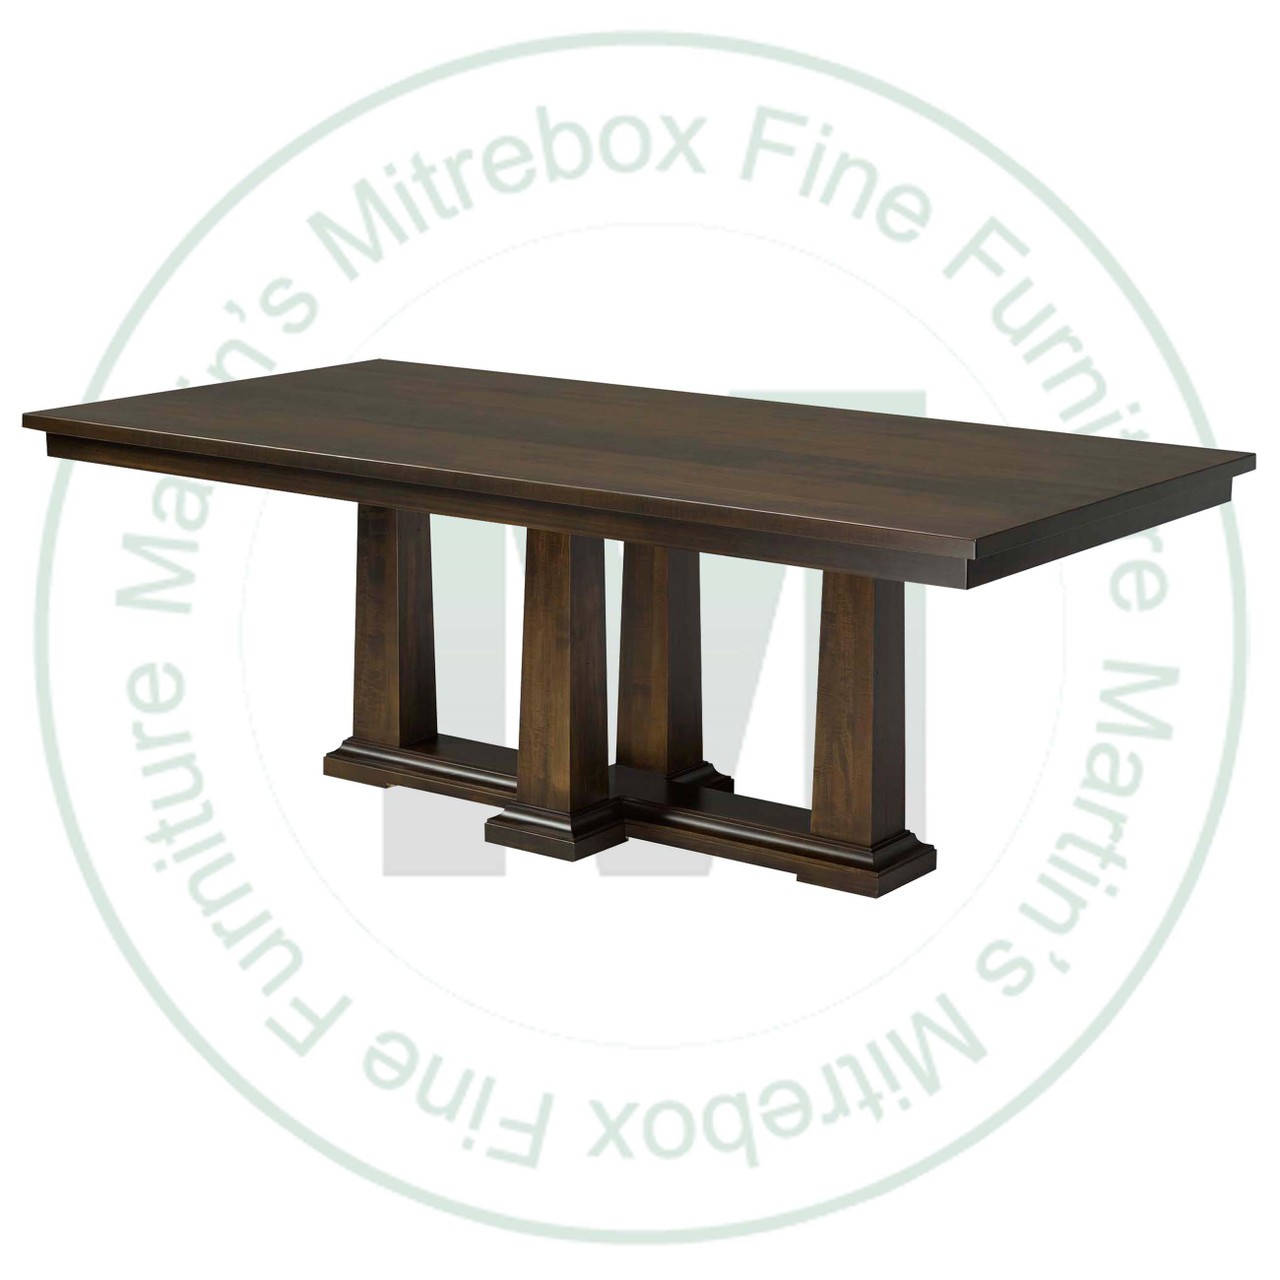 Maple Parthenon Double Pedestal Table 42''D x 120''W x 30''H And 2 - 16'' Extensions Has 1.75'' Thick Top